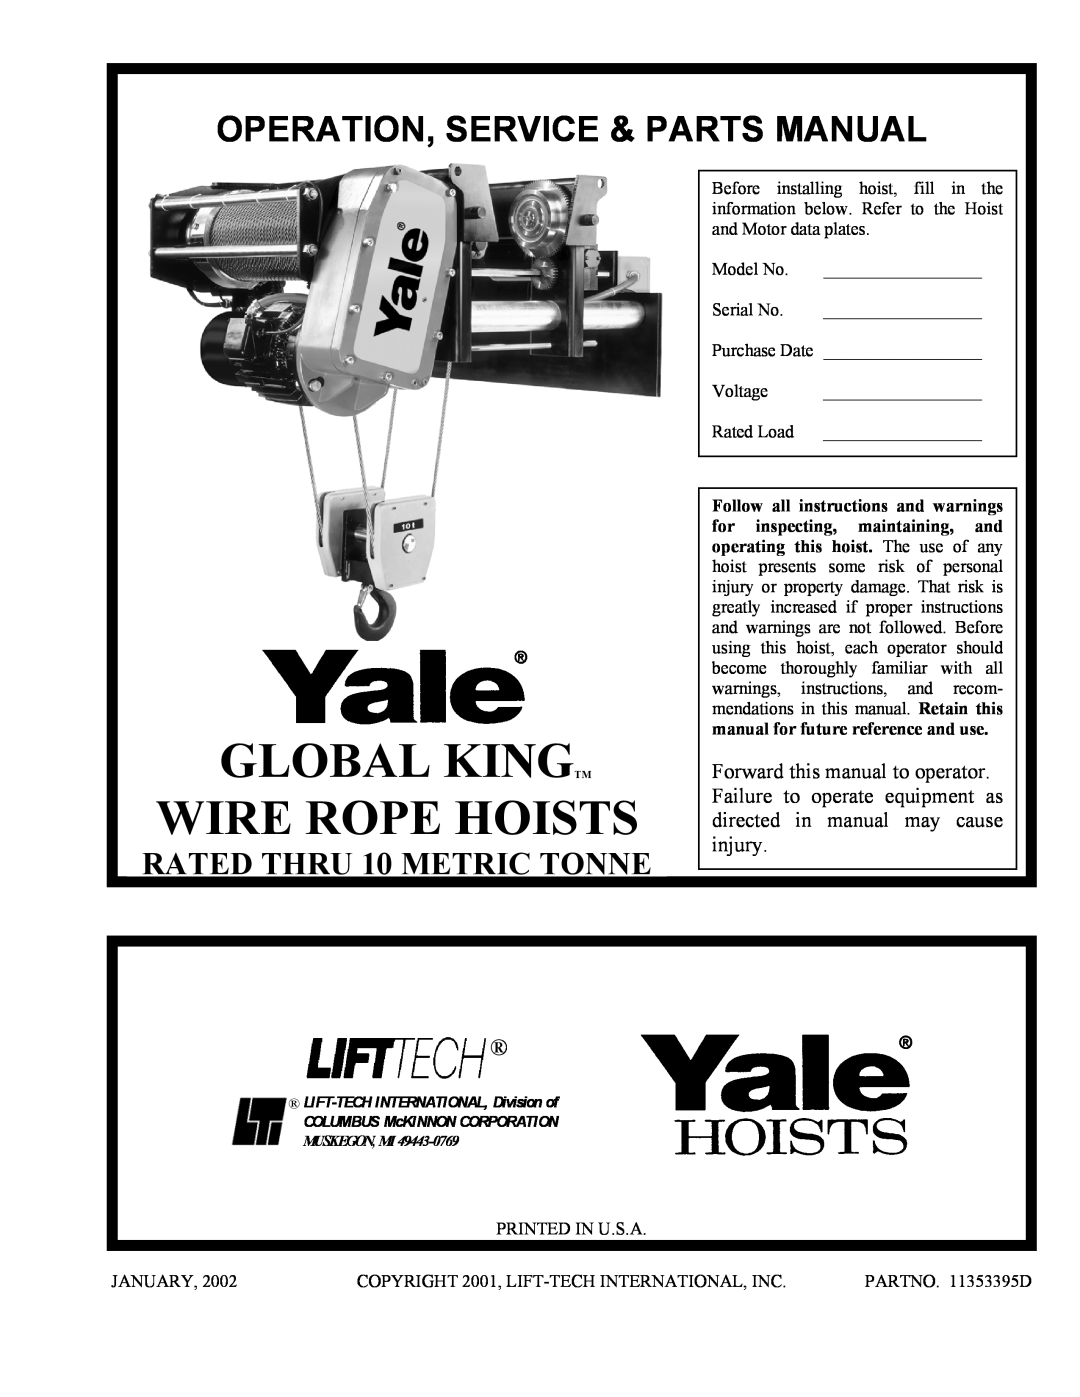 Yale 11353395D manual Global Kingtm Wire Rope Hoists, Operation, Service & Parts Manual, RATED THRU 10 METRIC TONNE 